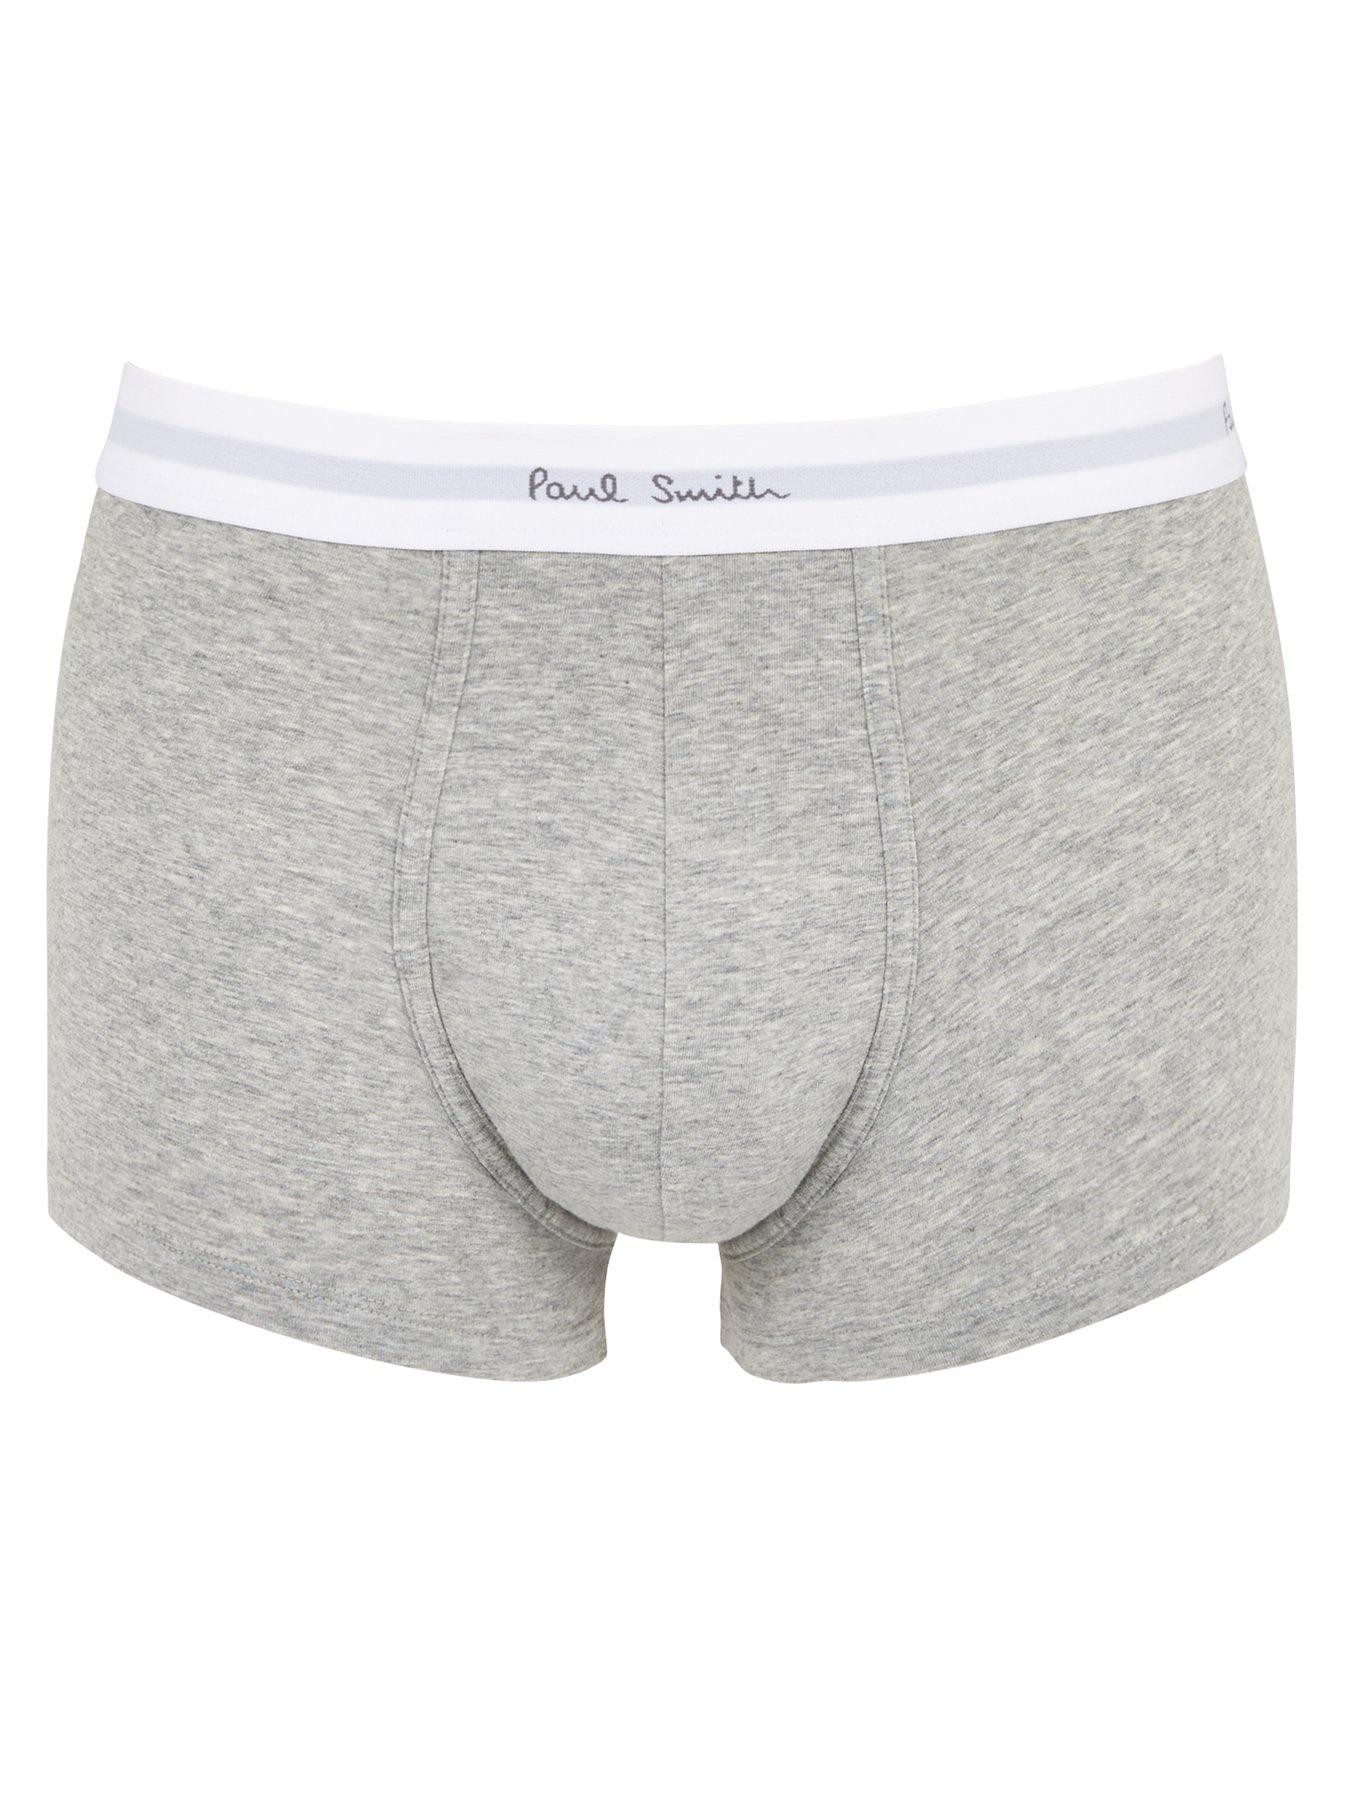 PS PAUL SMITH Men's Boxer Shorts 3 Pack - Multi | very.co.uk